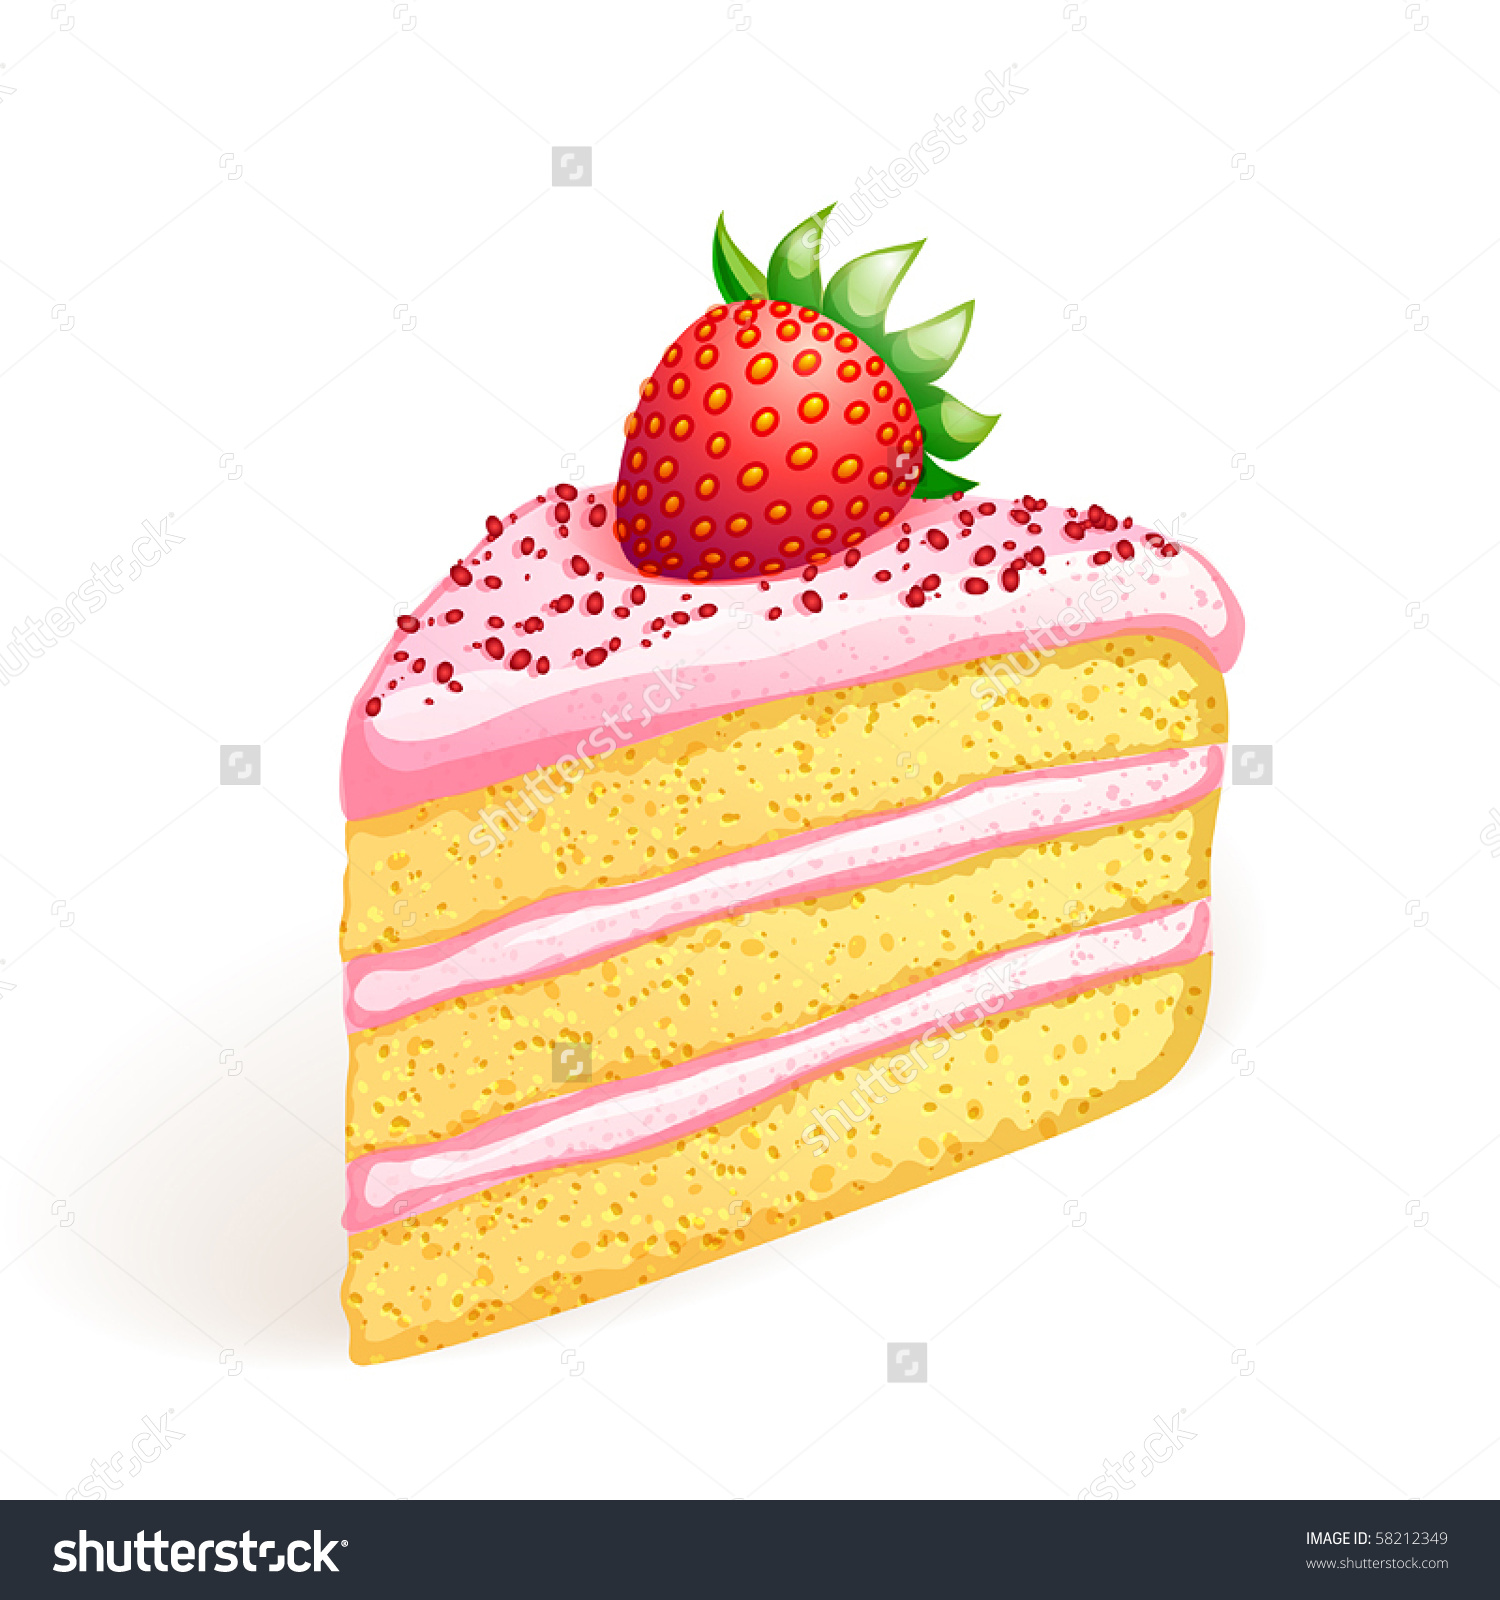 Piece Of Cake With Strawberry.